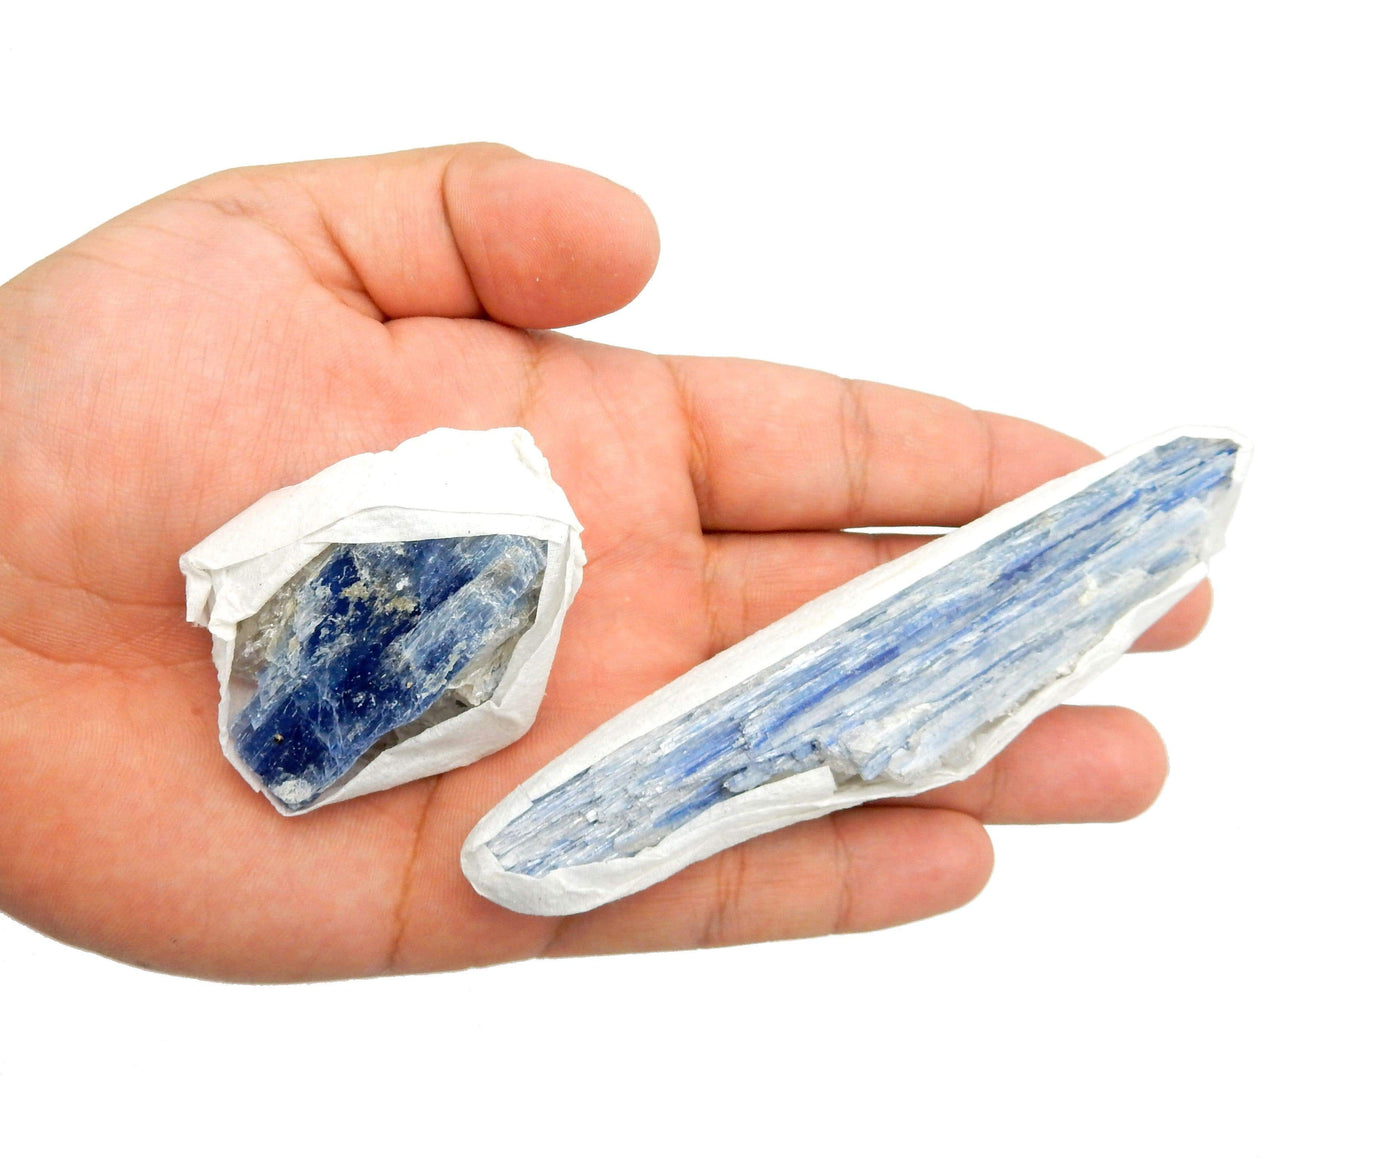 2 individual Blue Kyanite Blades displayed in hand, edges wrapped in tissue.